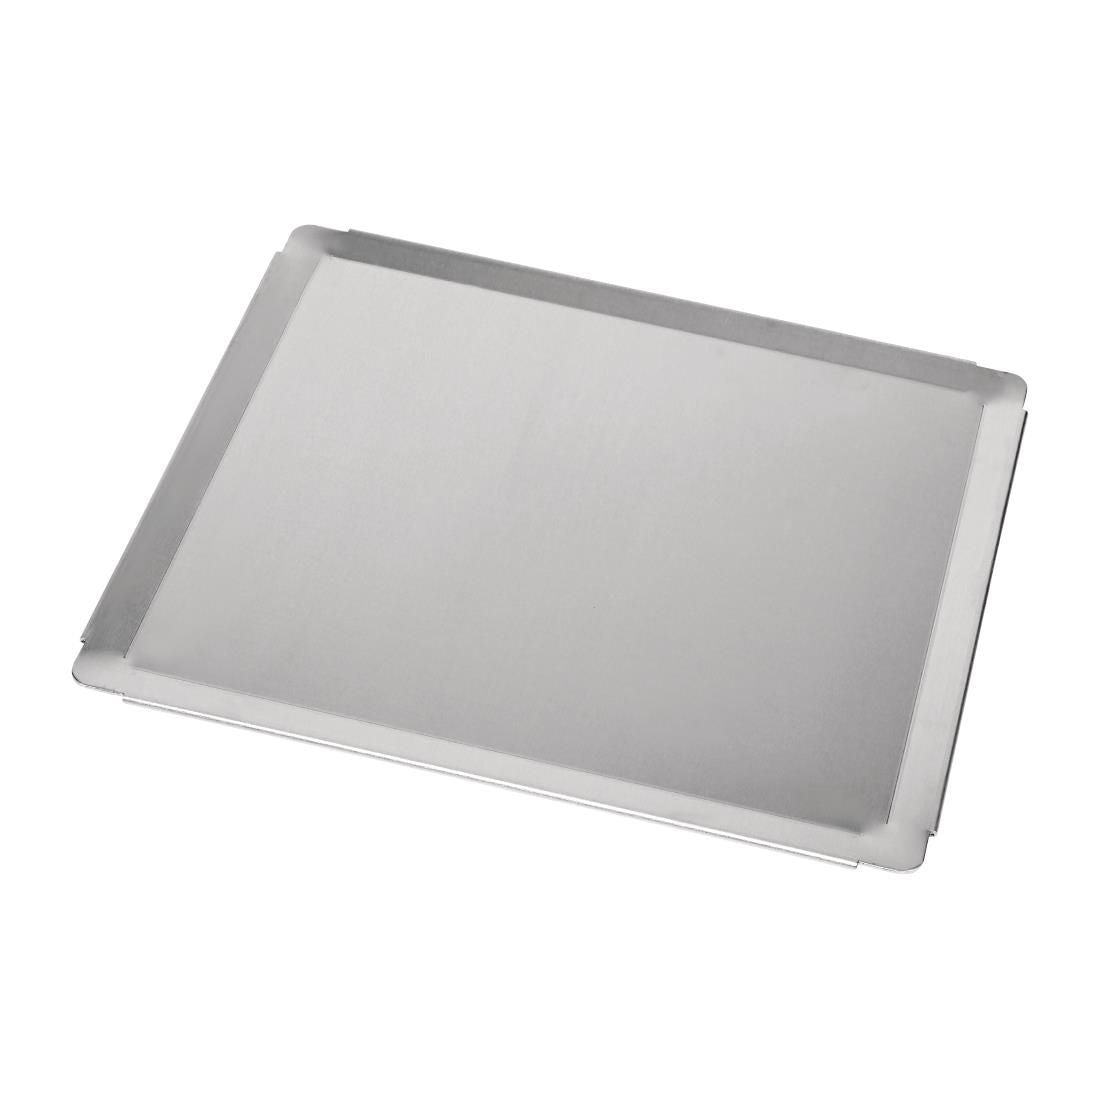 Lincat Baking Tray to Fit CiBO Ovens JD Catering Equipment Solutions Ltd